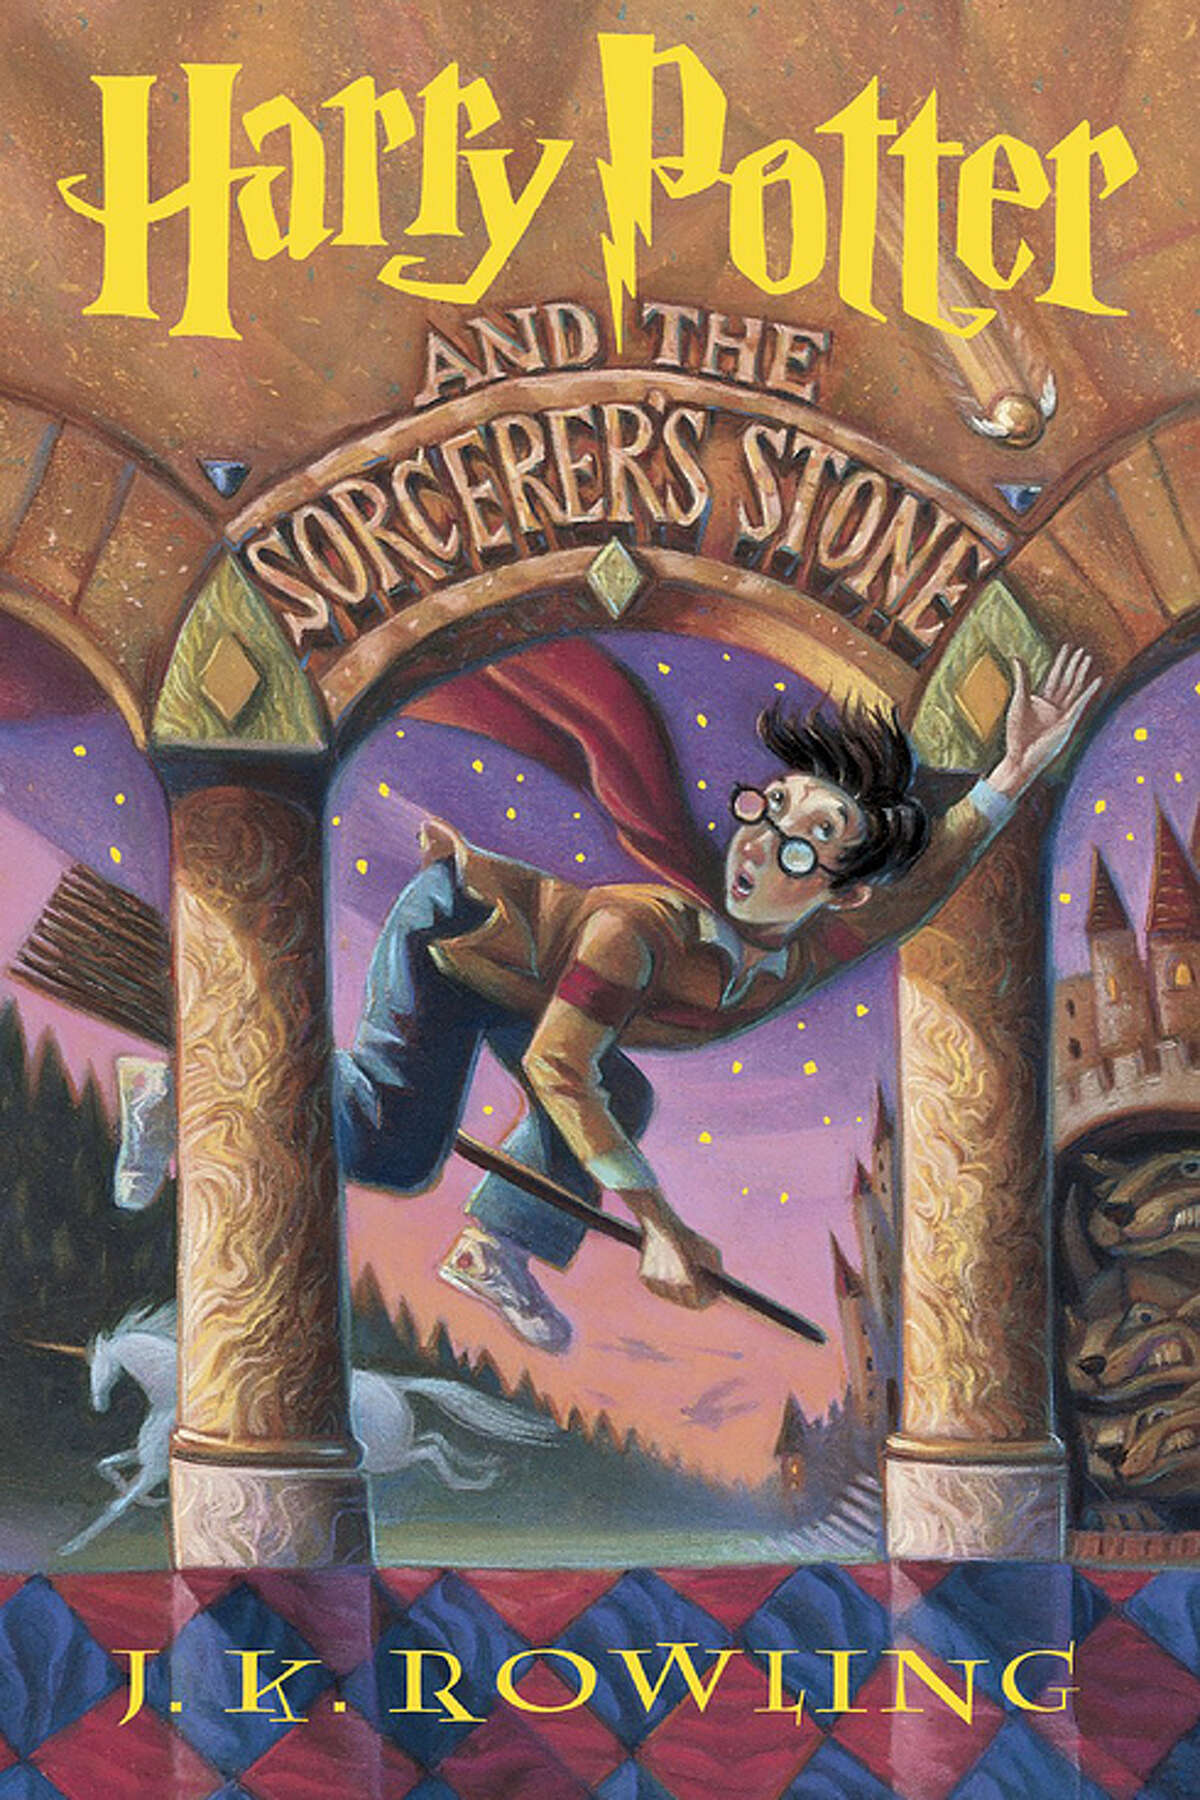 Harry Potter and the Sorcerer's Stone (original)